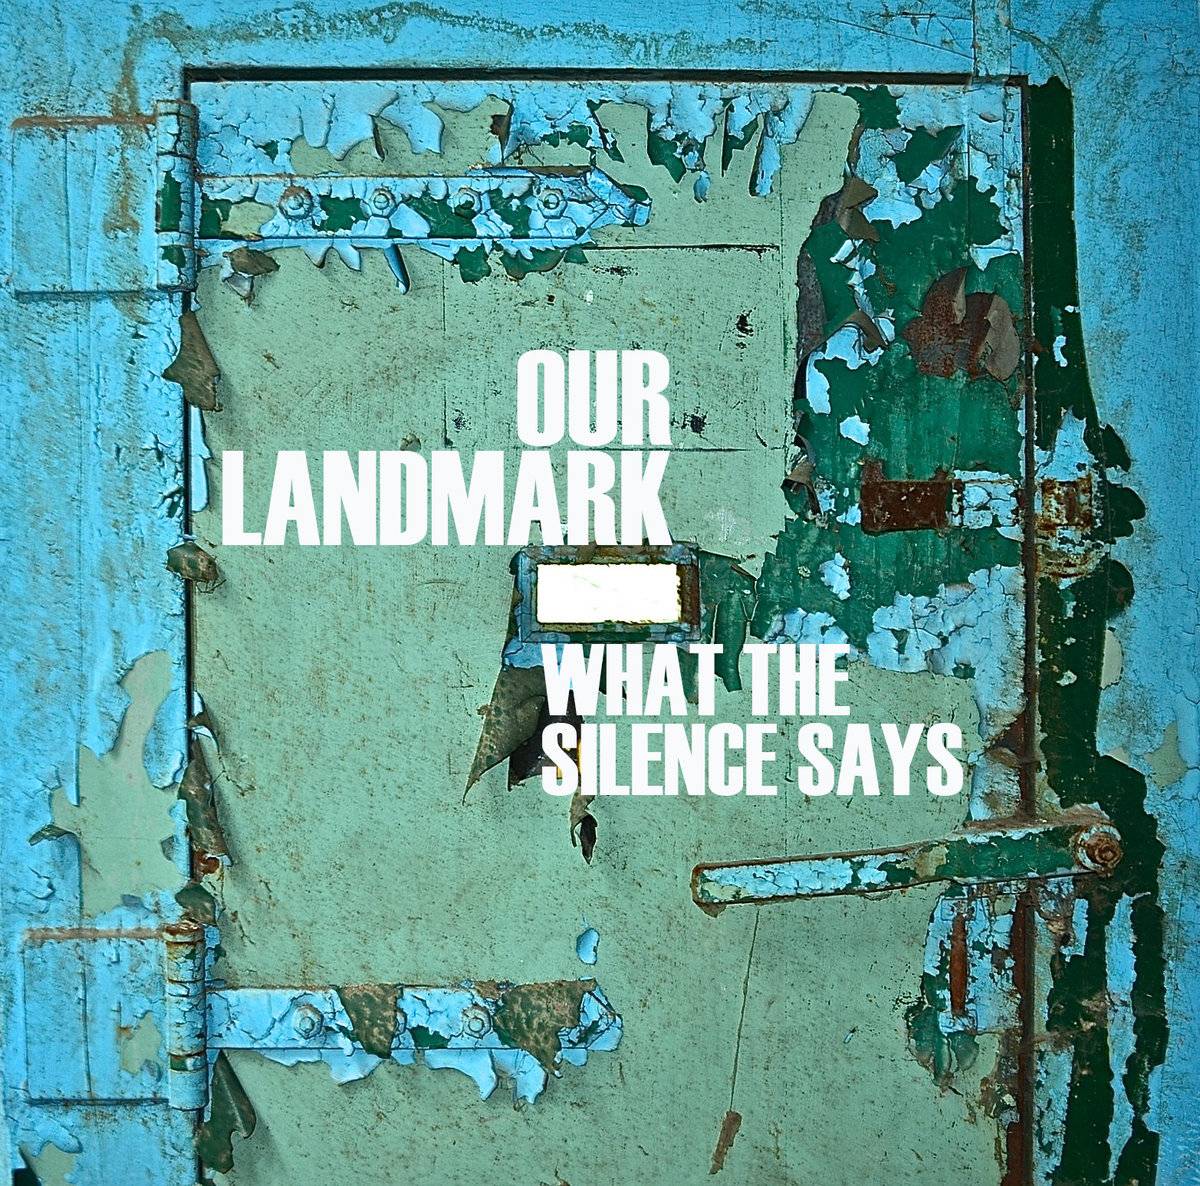 Our Landmark releasing their debut album What the Silence Says on Friday